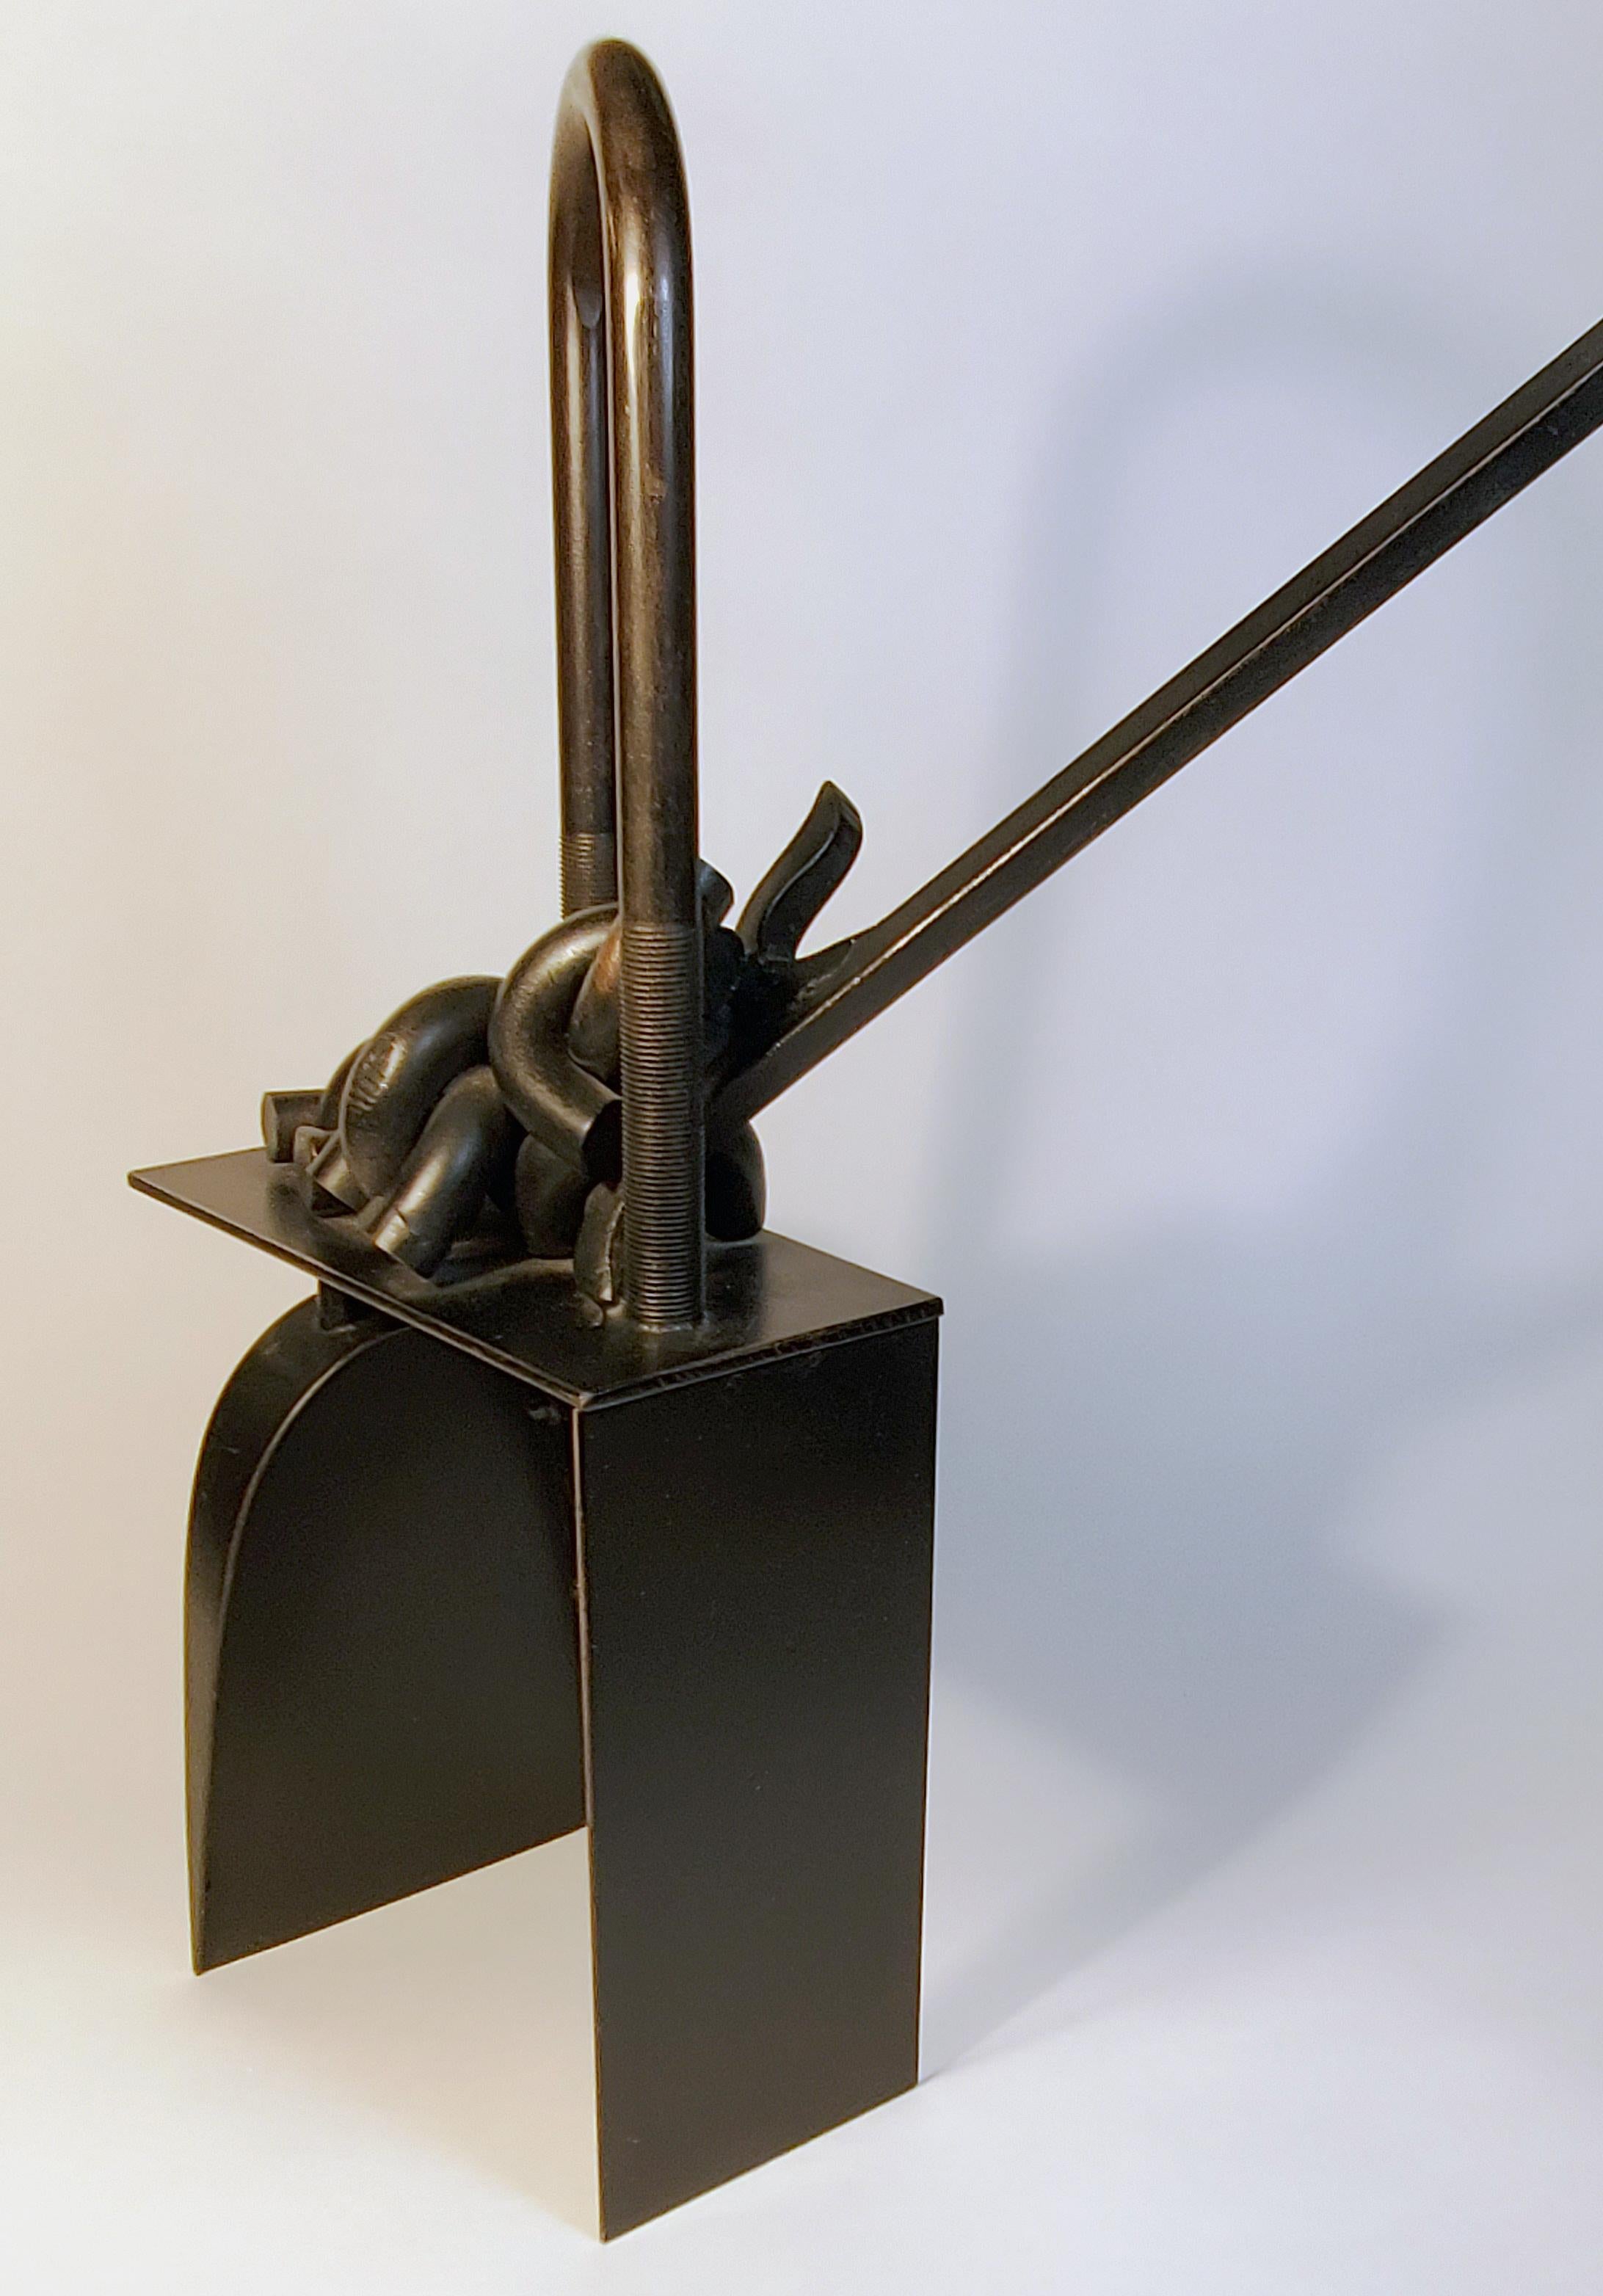 Sculpture created of found and fabricated steel, Titled 